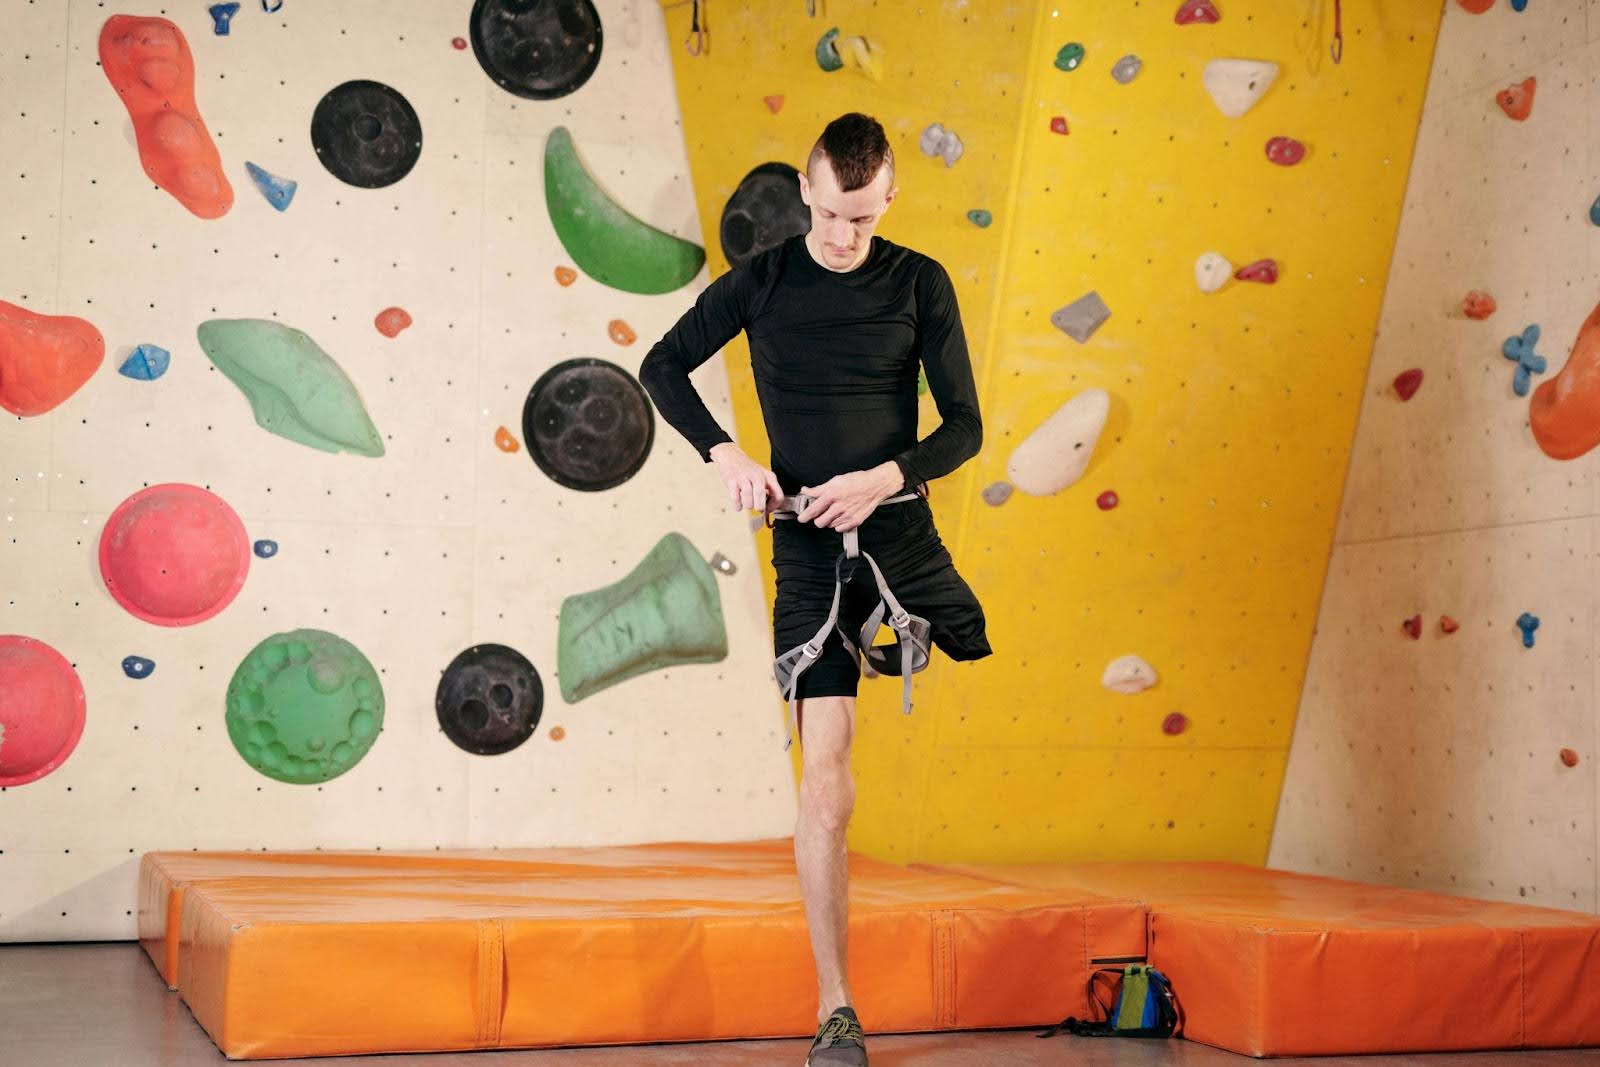 A man with one leg puts on a belt so he can rock climb